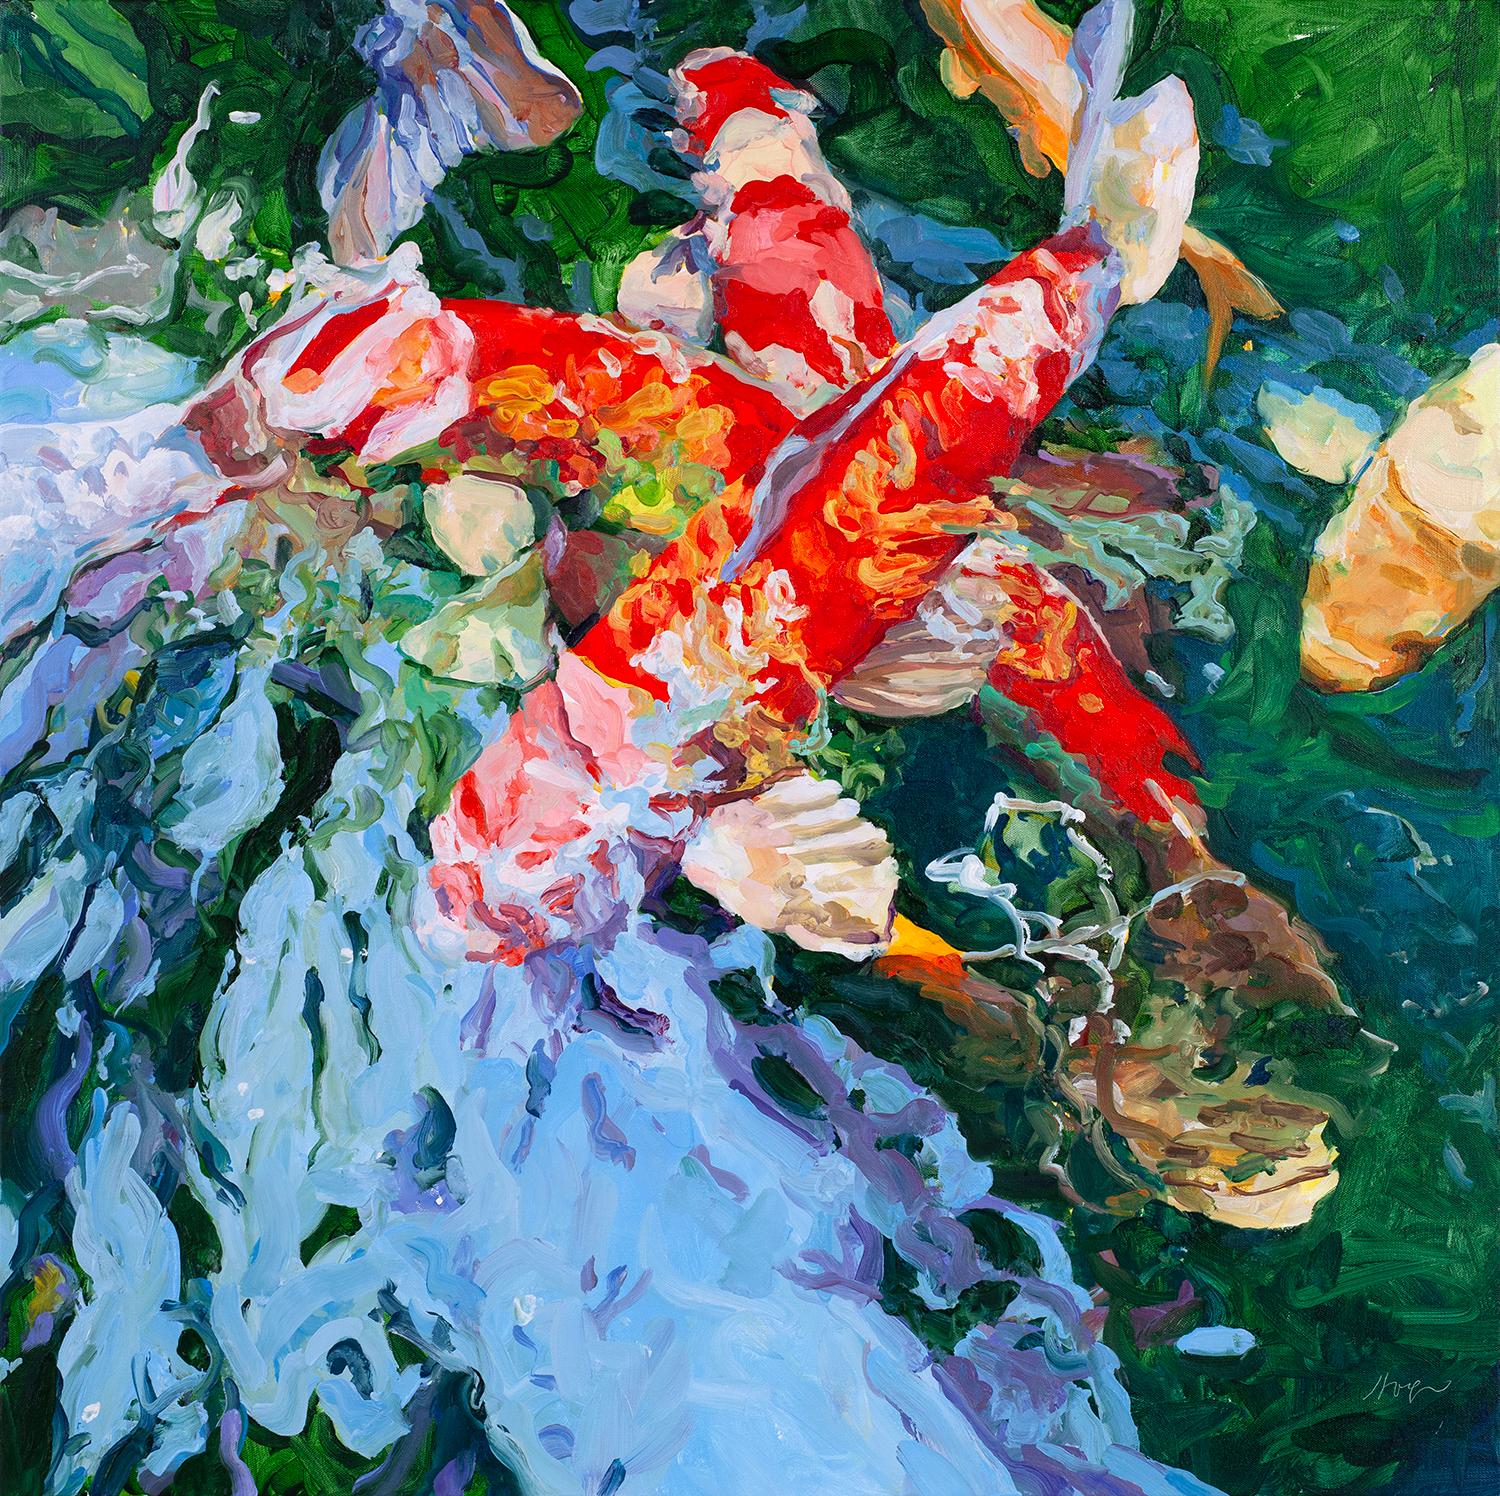 "9 Koi 23" - Bright Abstract Fish Underwater - red/orange/yellow/blue/green - Painting by Linda Holt